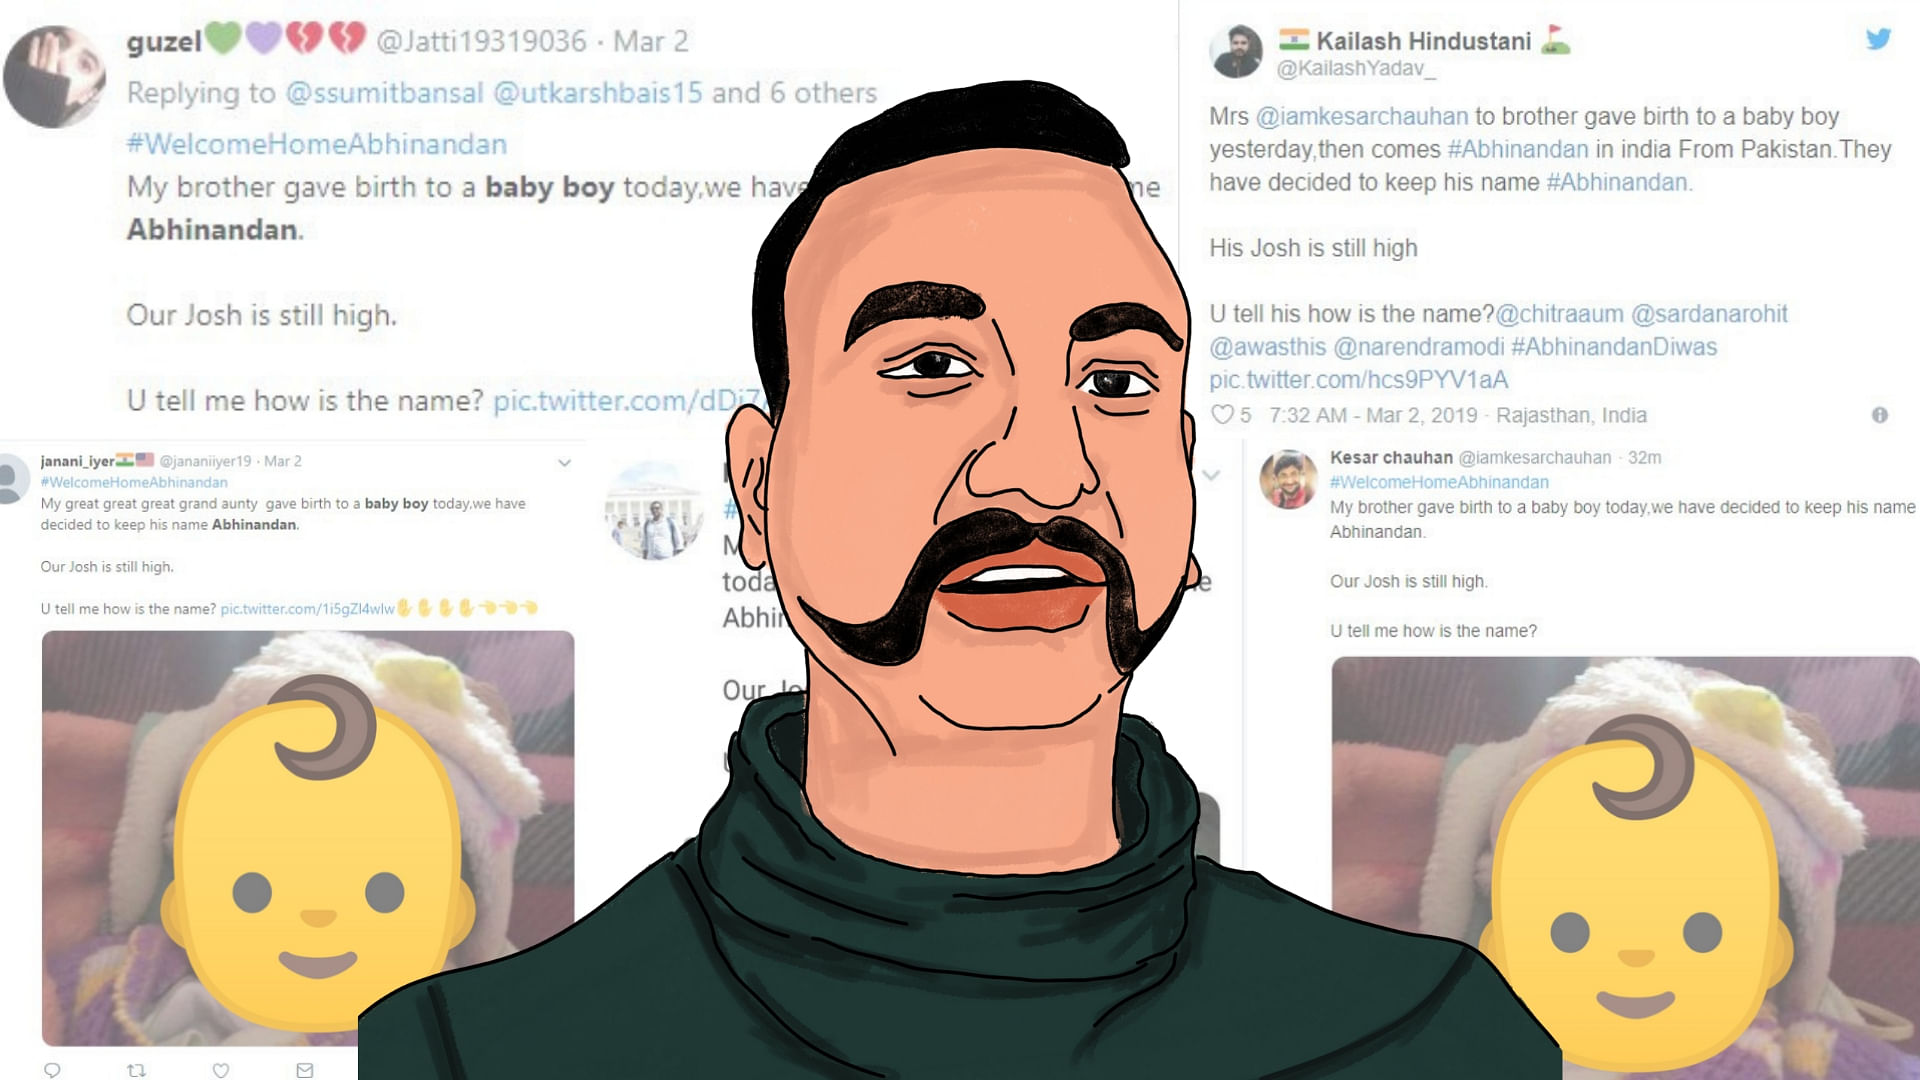 Many Twitter users put up tweets claiming the birth of a ‘baby boy’ in their family, whom they named Abhinandan.